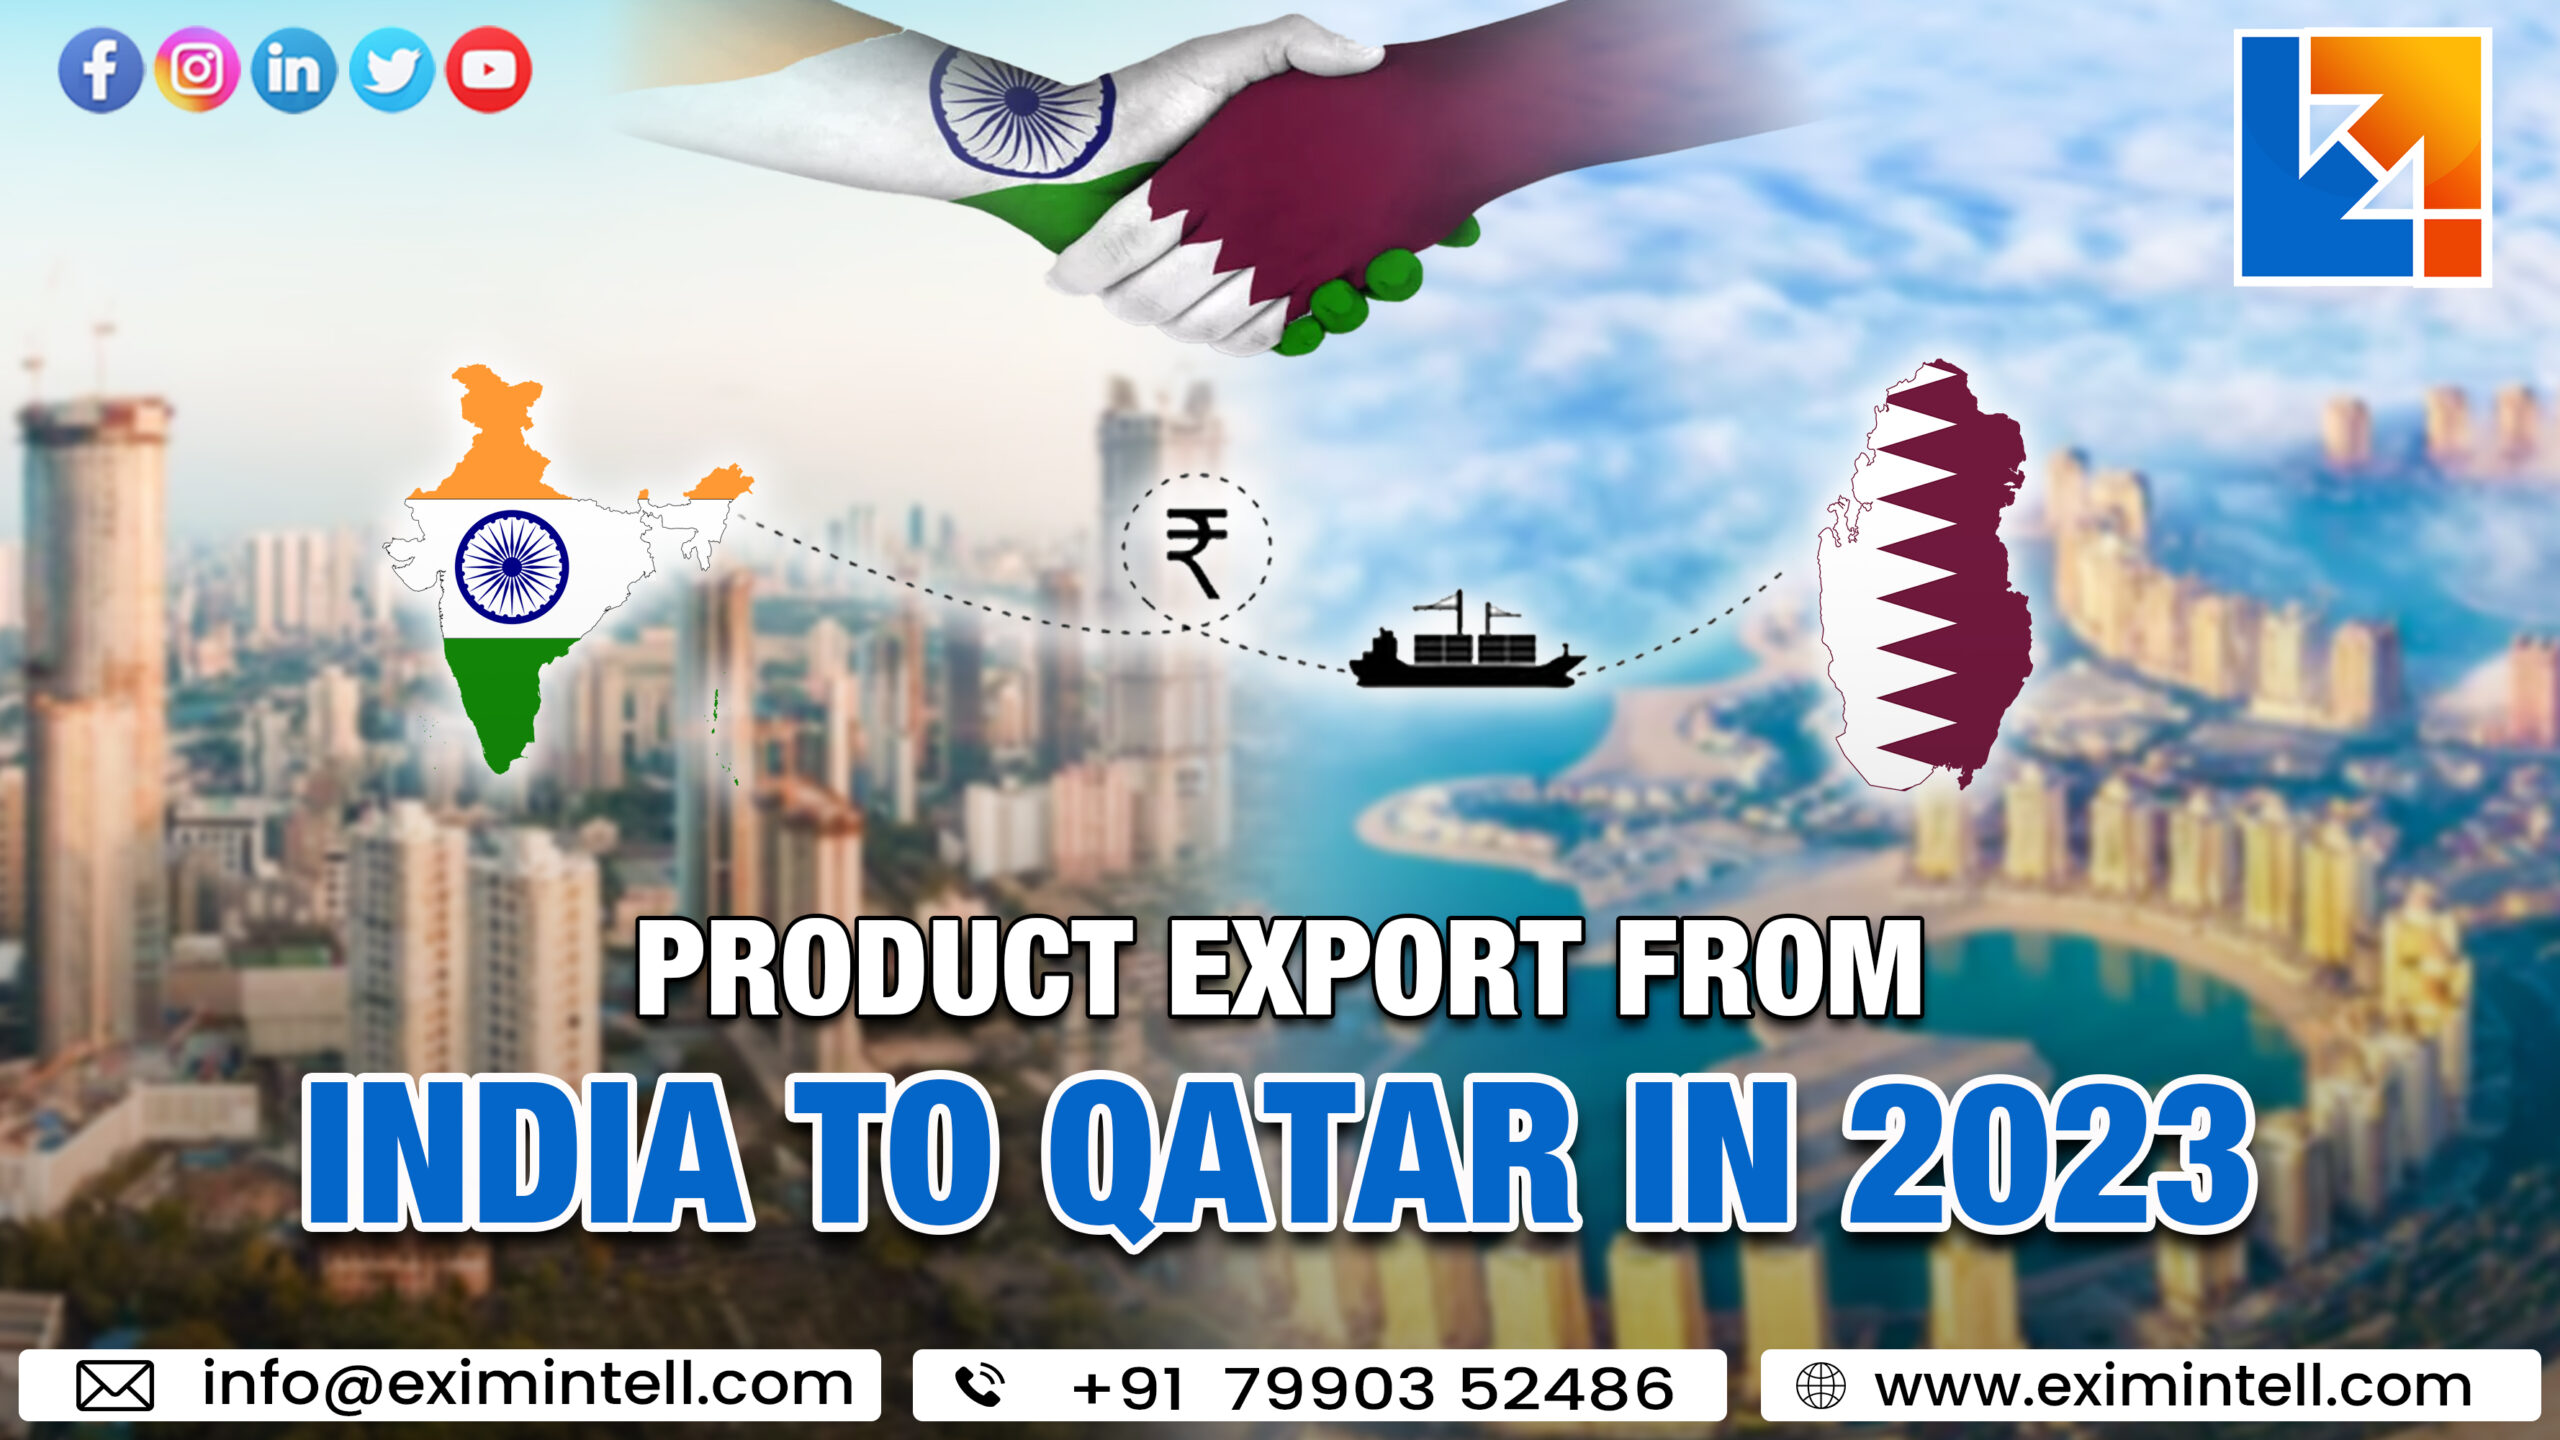 Product Exports from India to Qatar in 2023